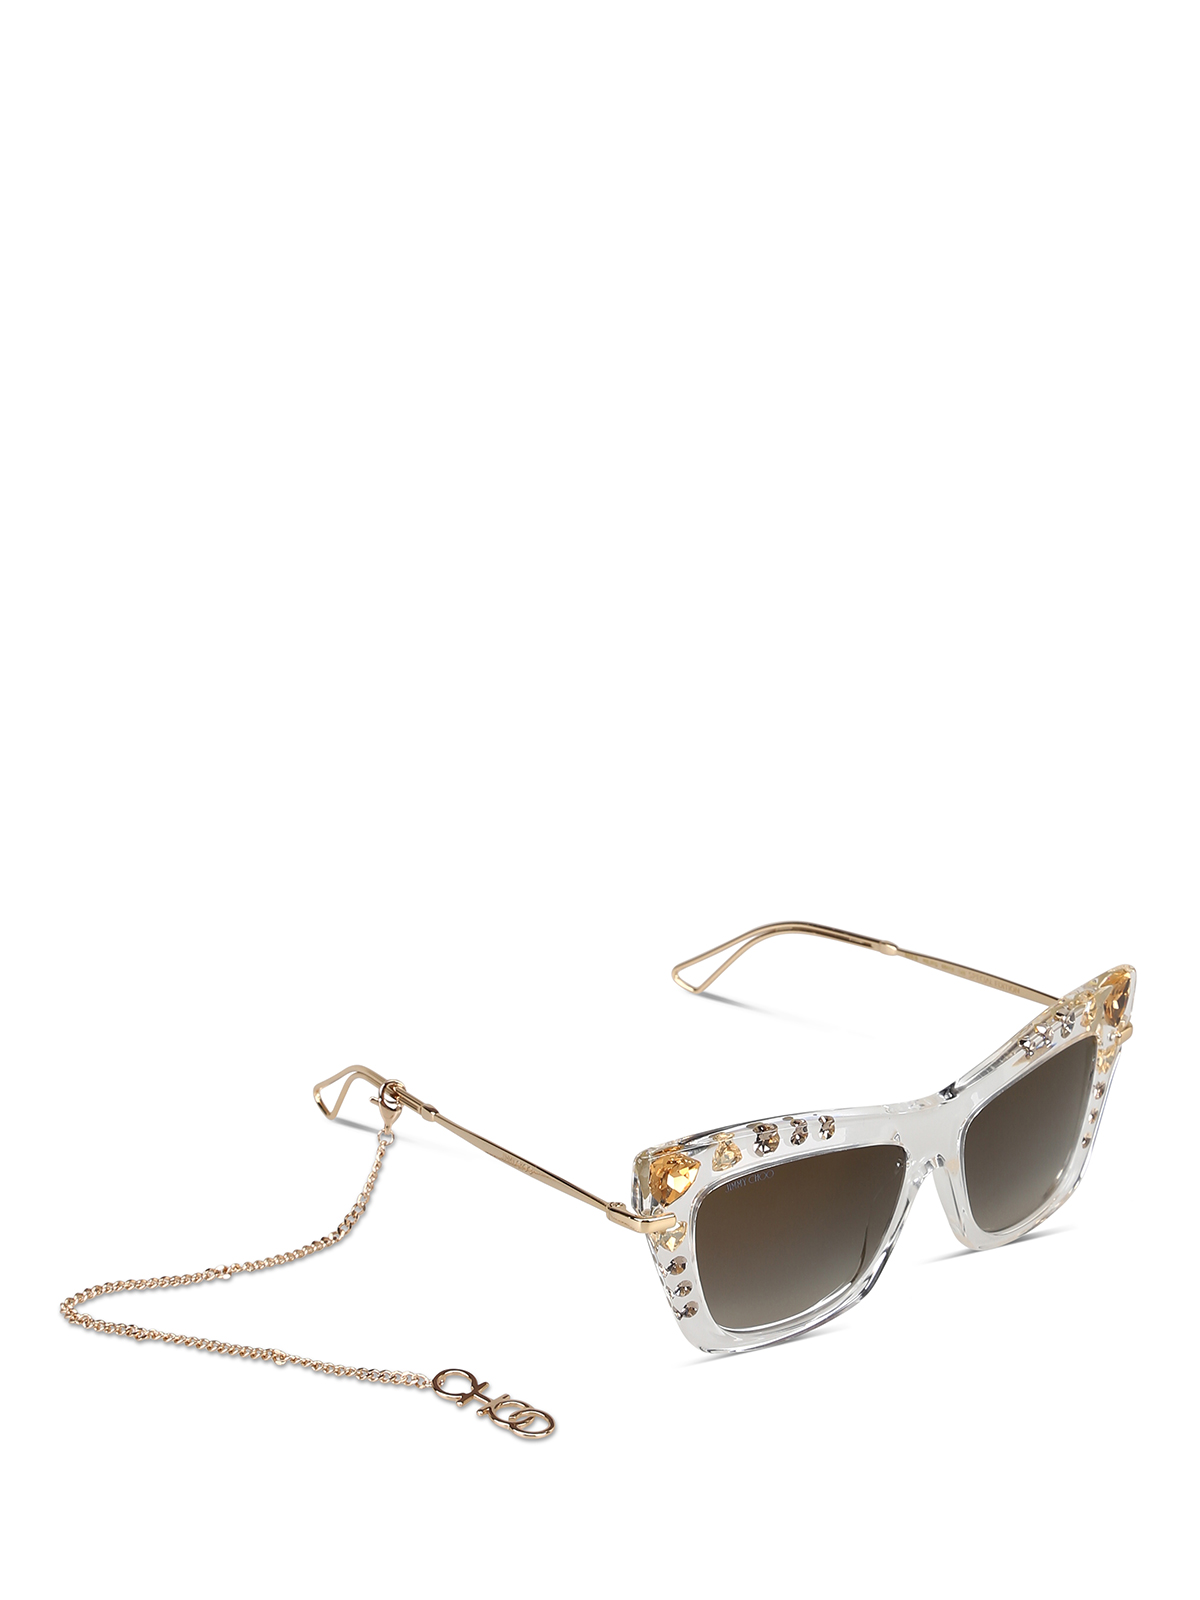 JIMMY CHOO BEE SUNGLASSES WITH CRYSTALS